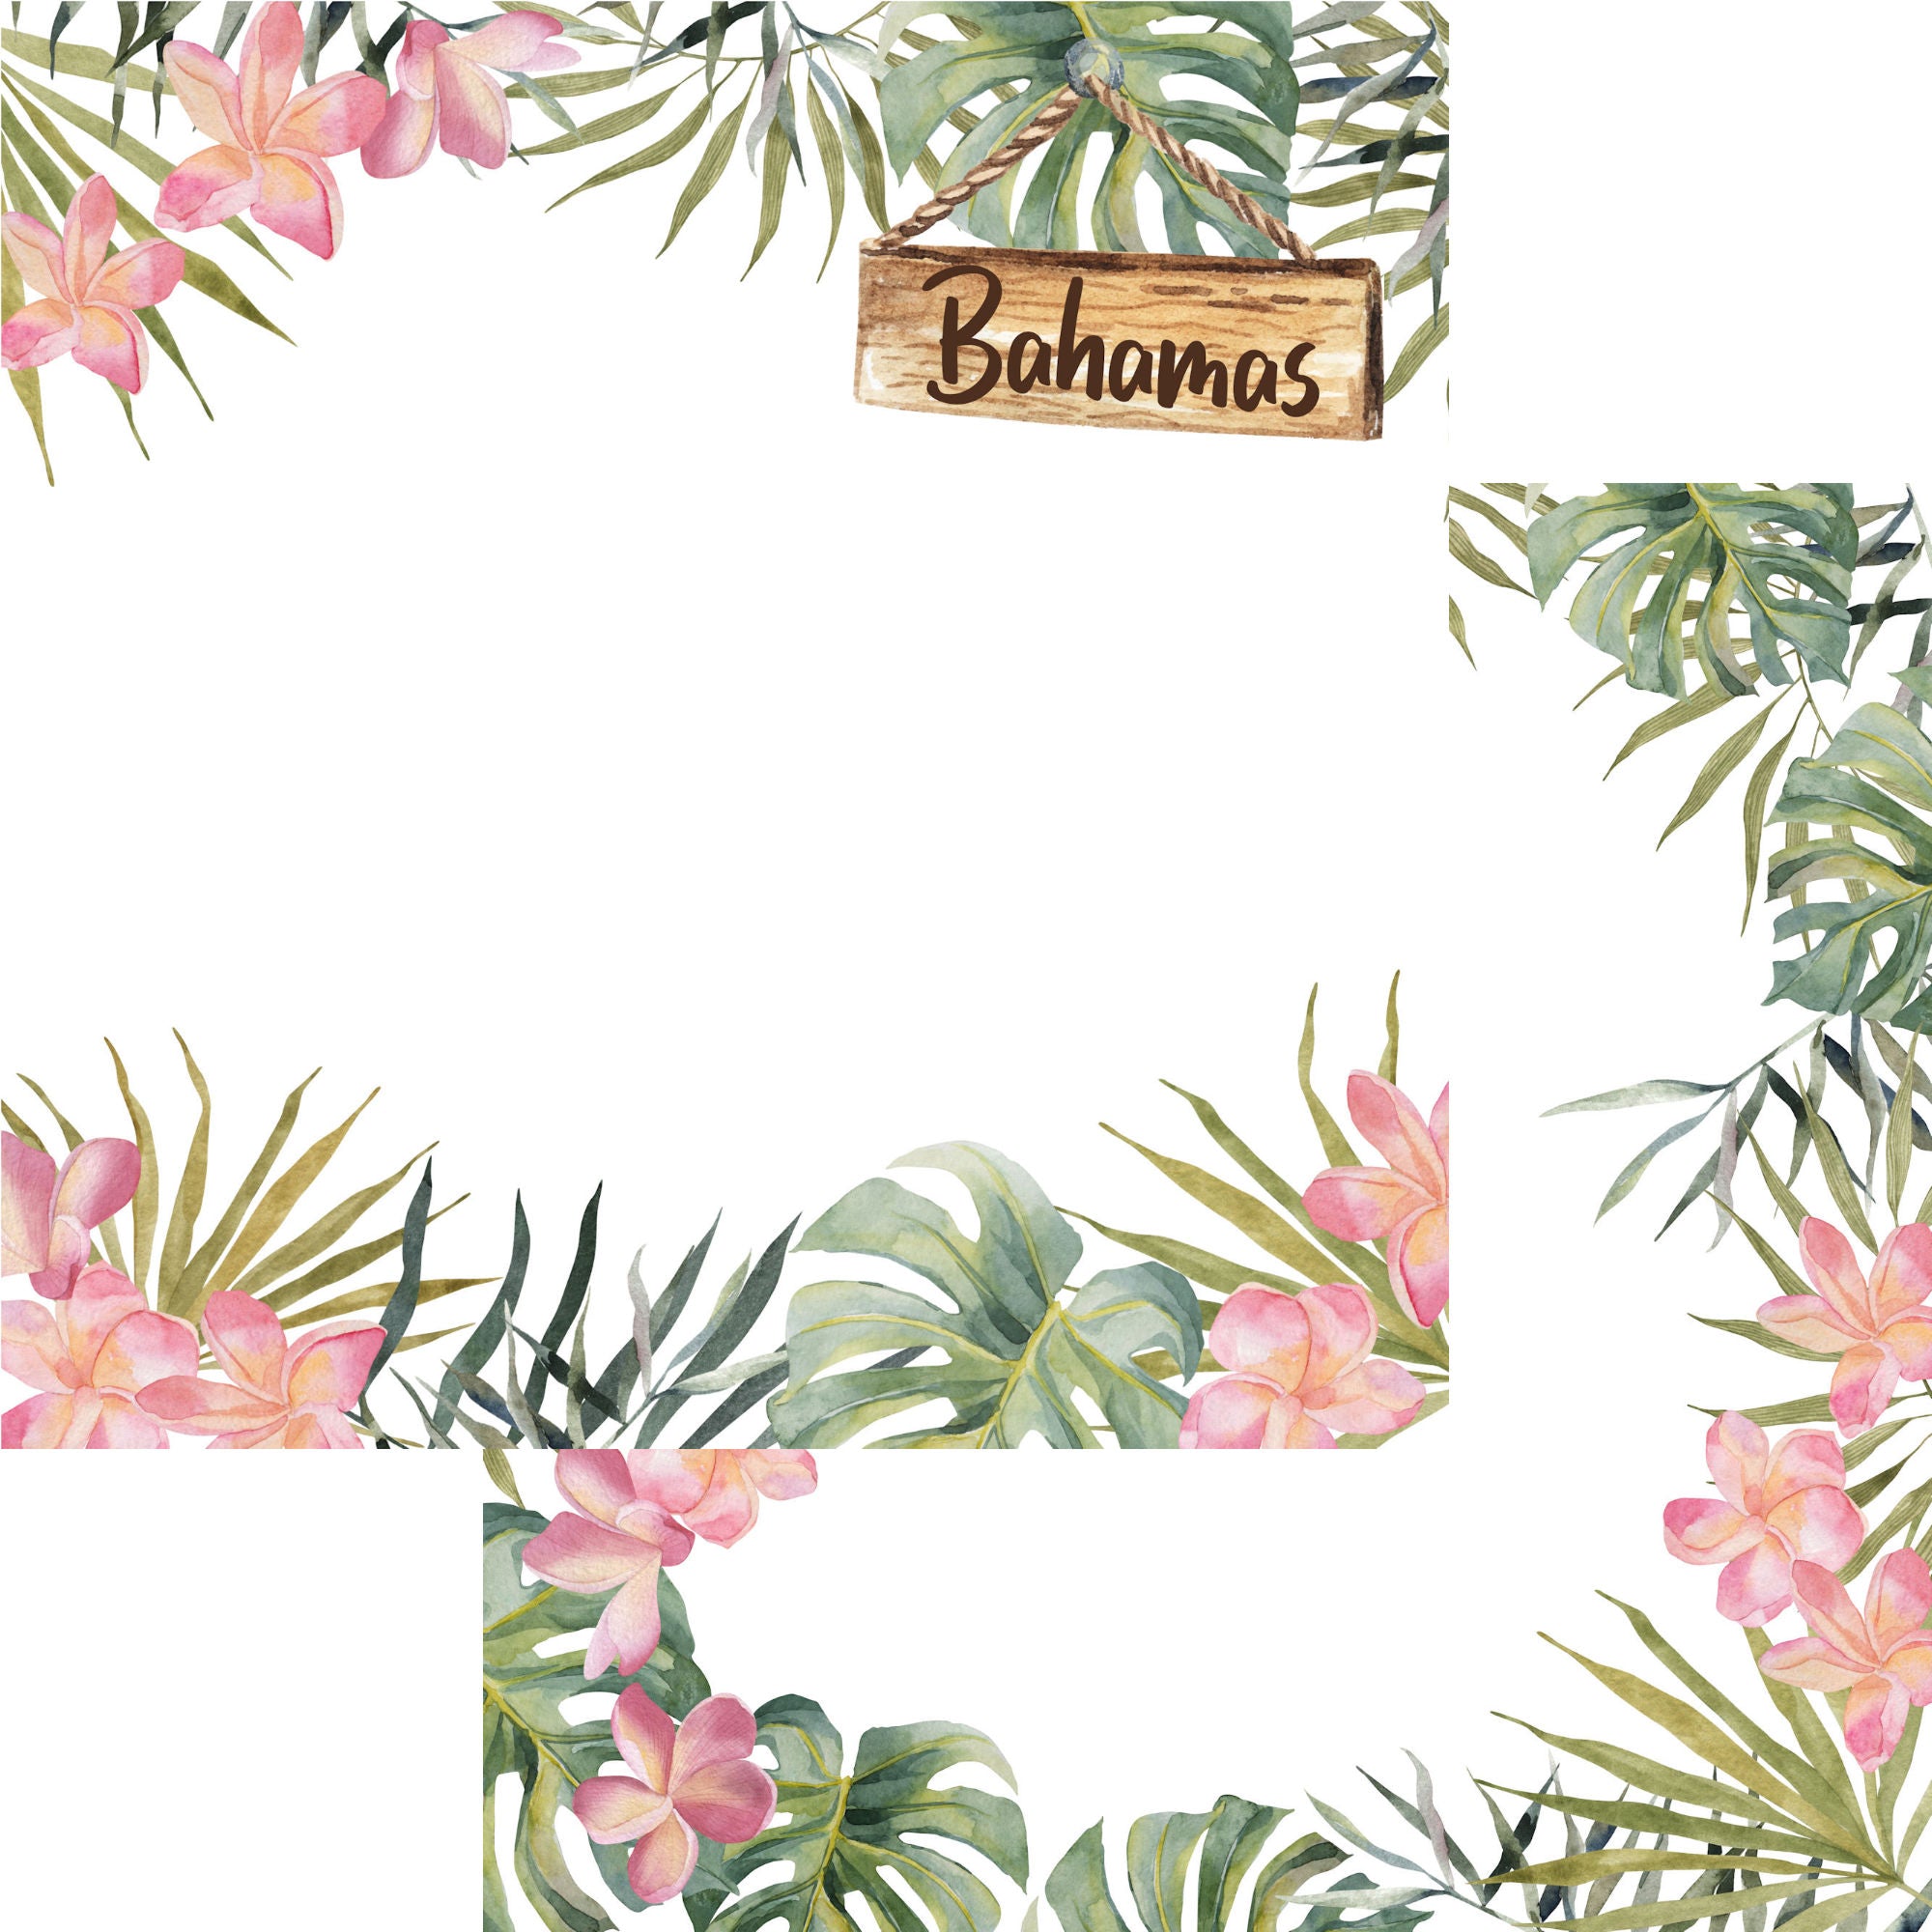 Tropical Paradise Collection Bahamas 12 x 12 Double-Sided Scrapbook Paper by SSC Designs